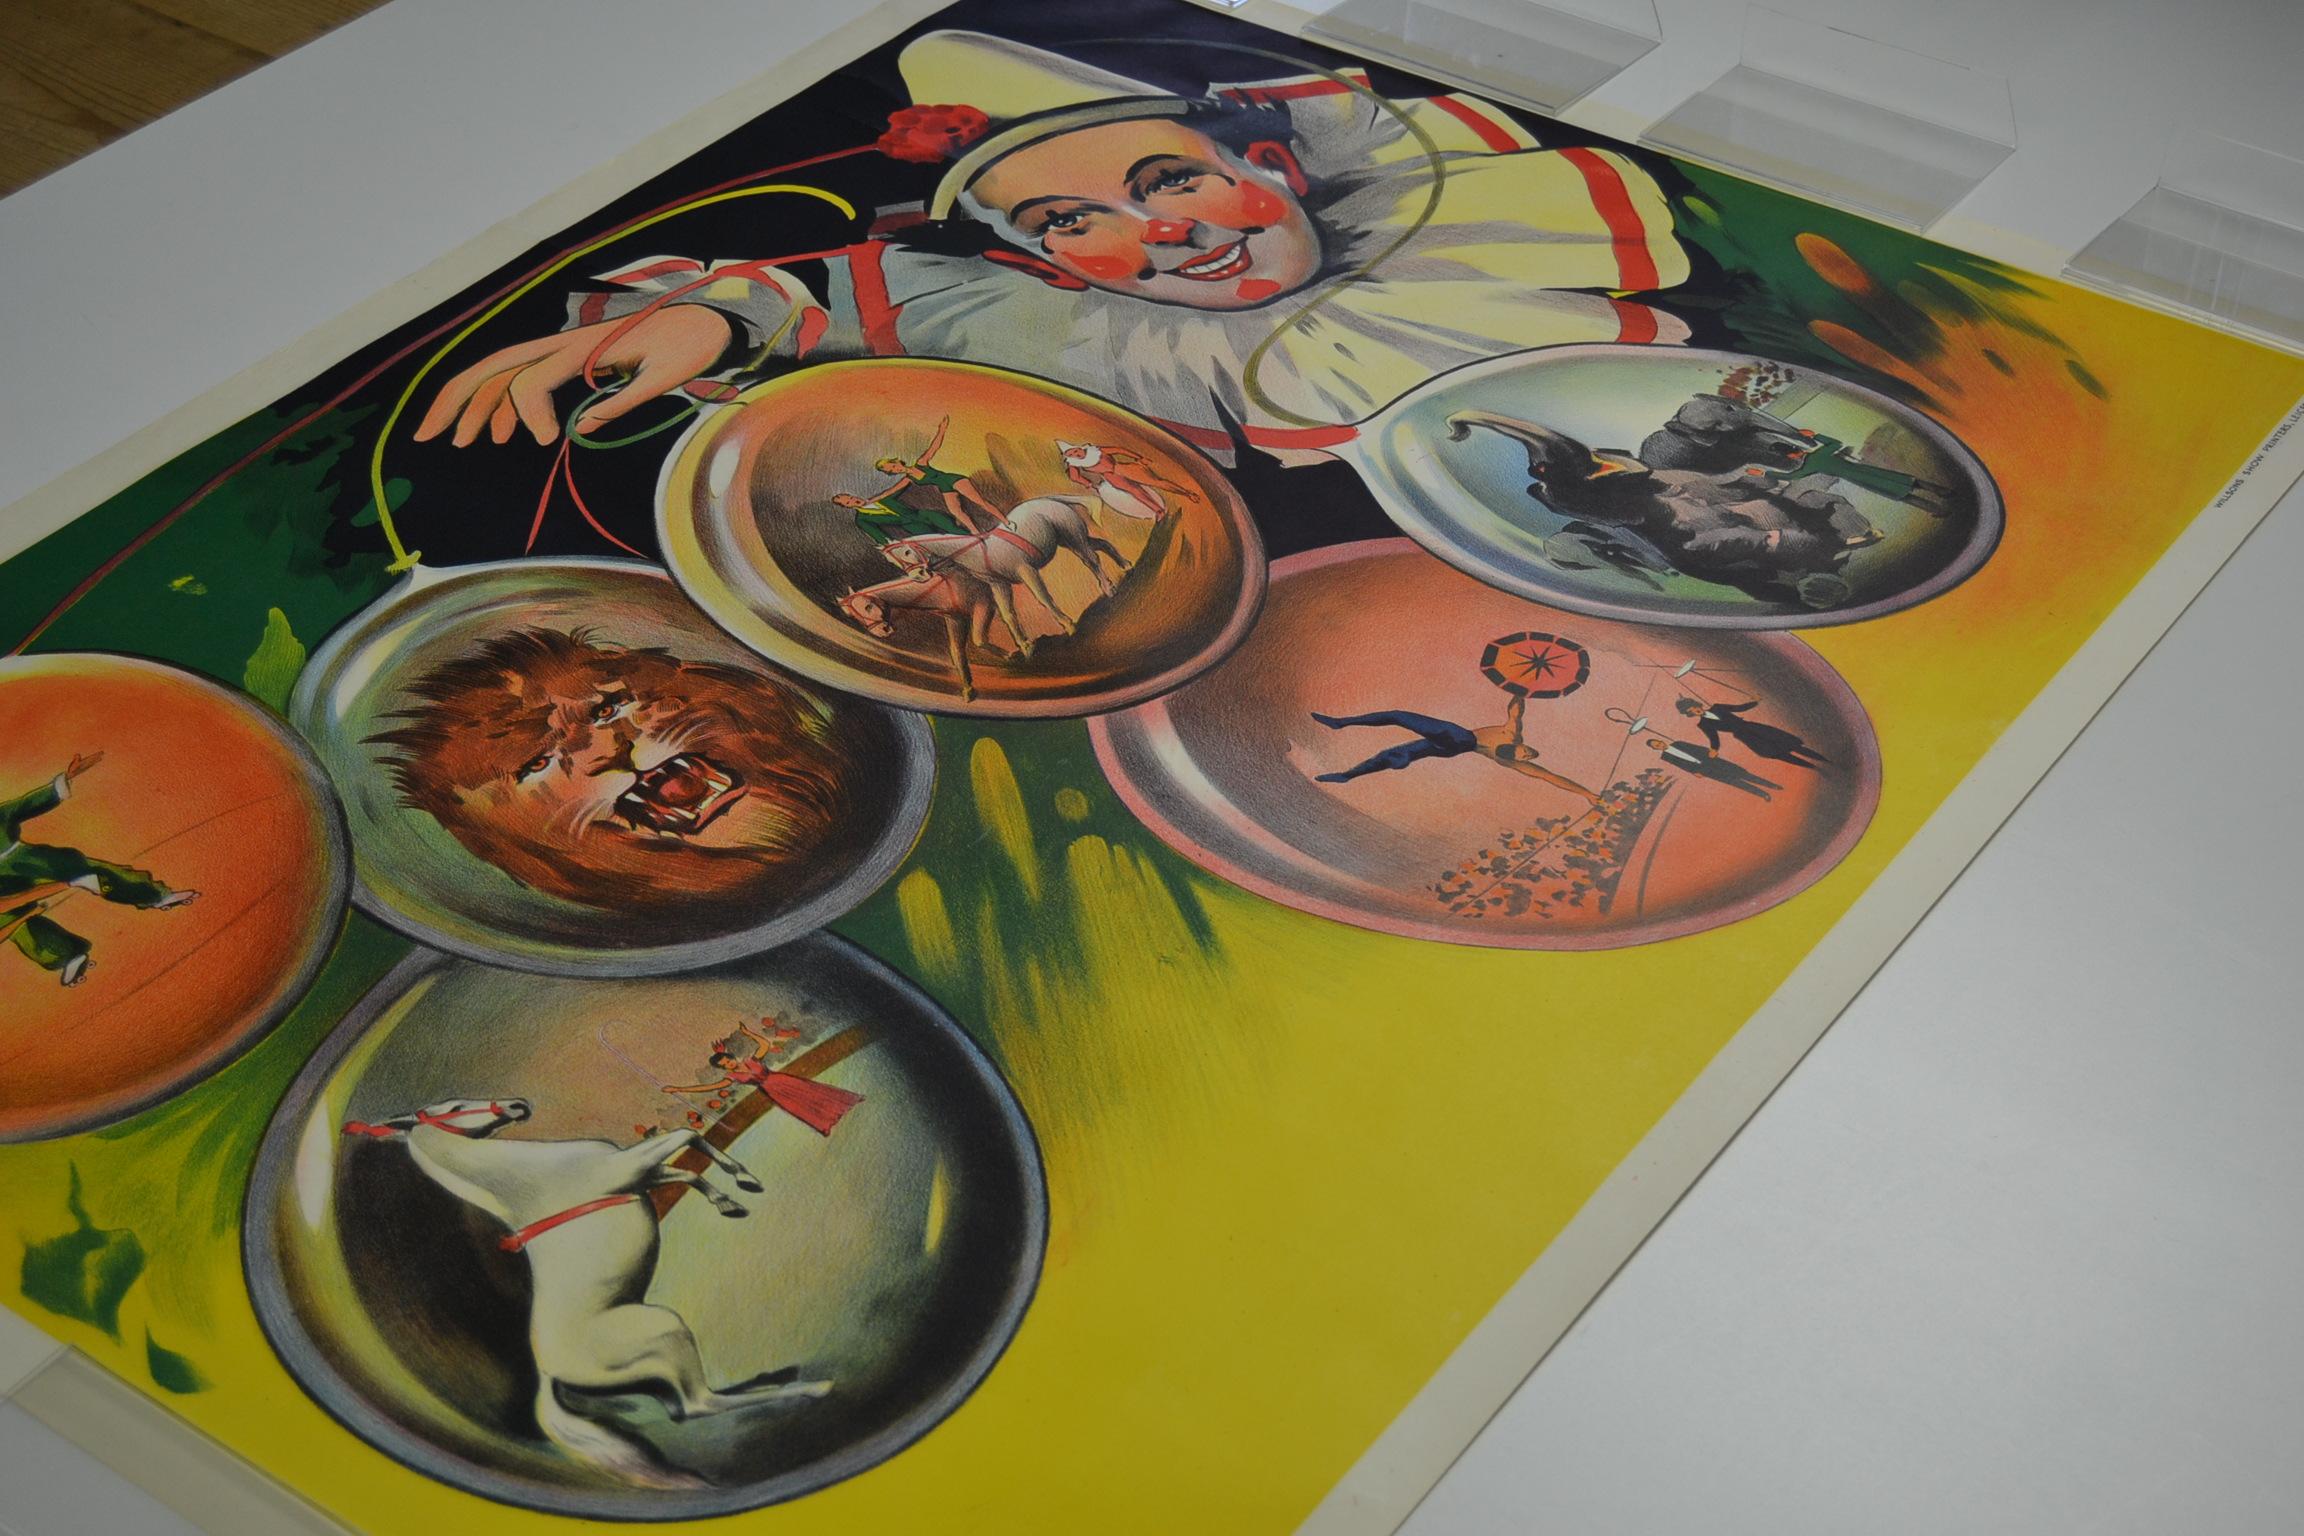 Litho Circus Poster with Clown and Circus Scenes Printed by Willsons Leicester 2